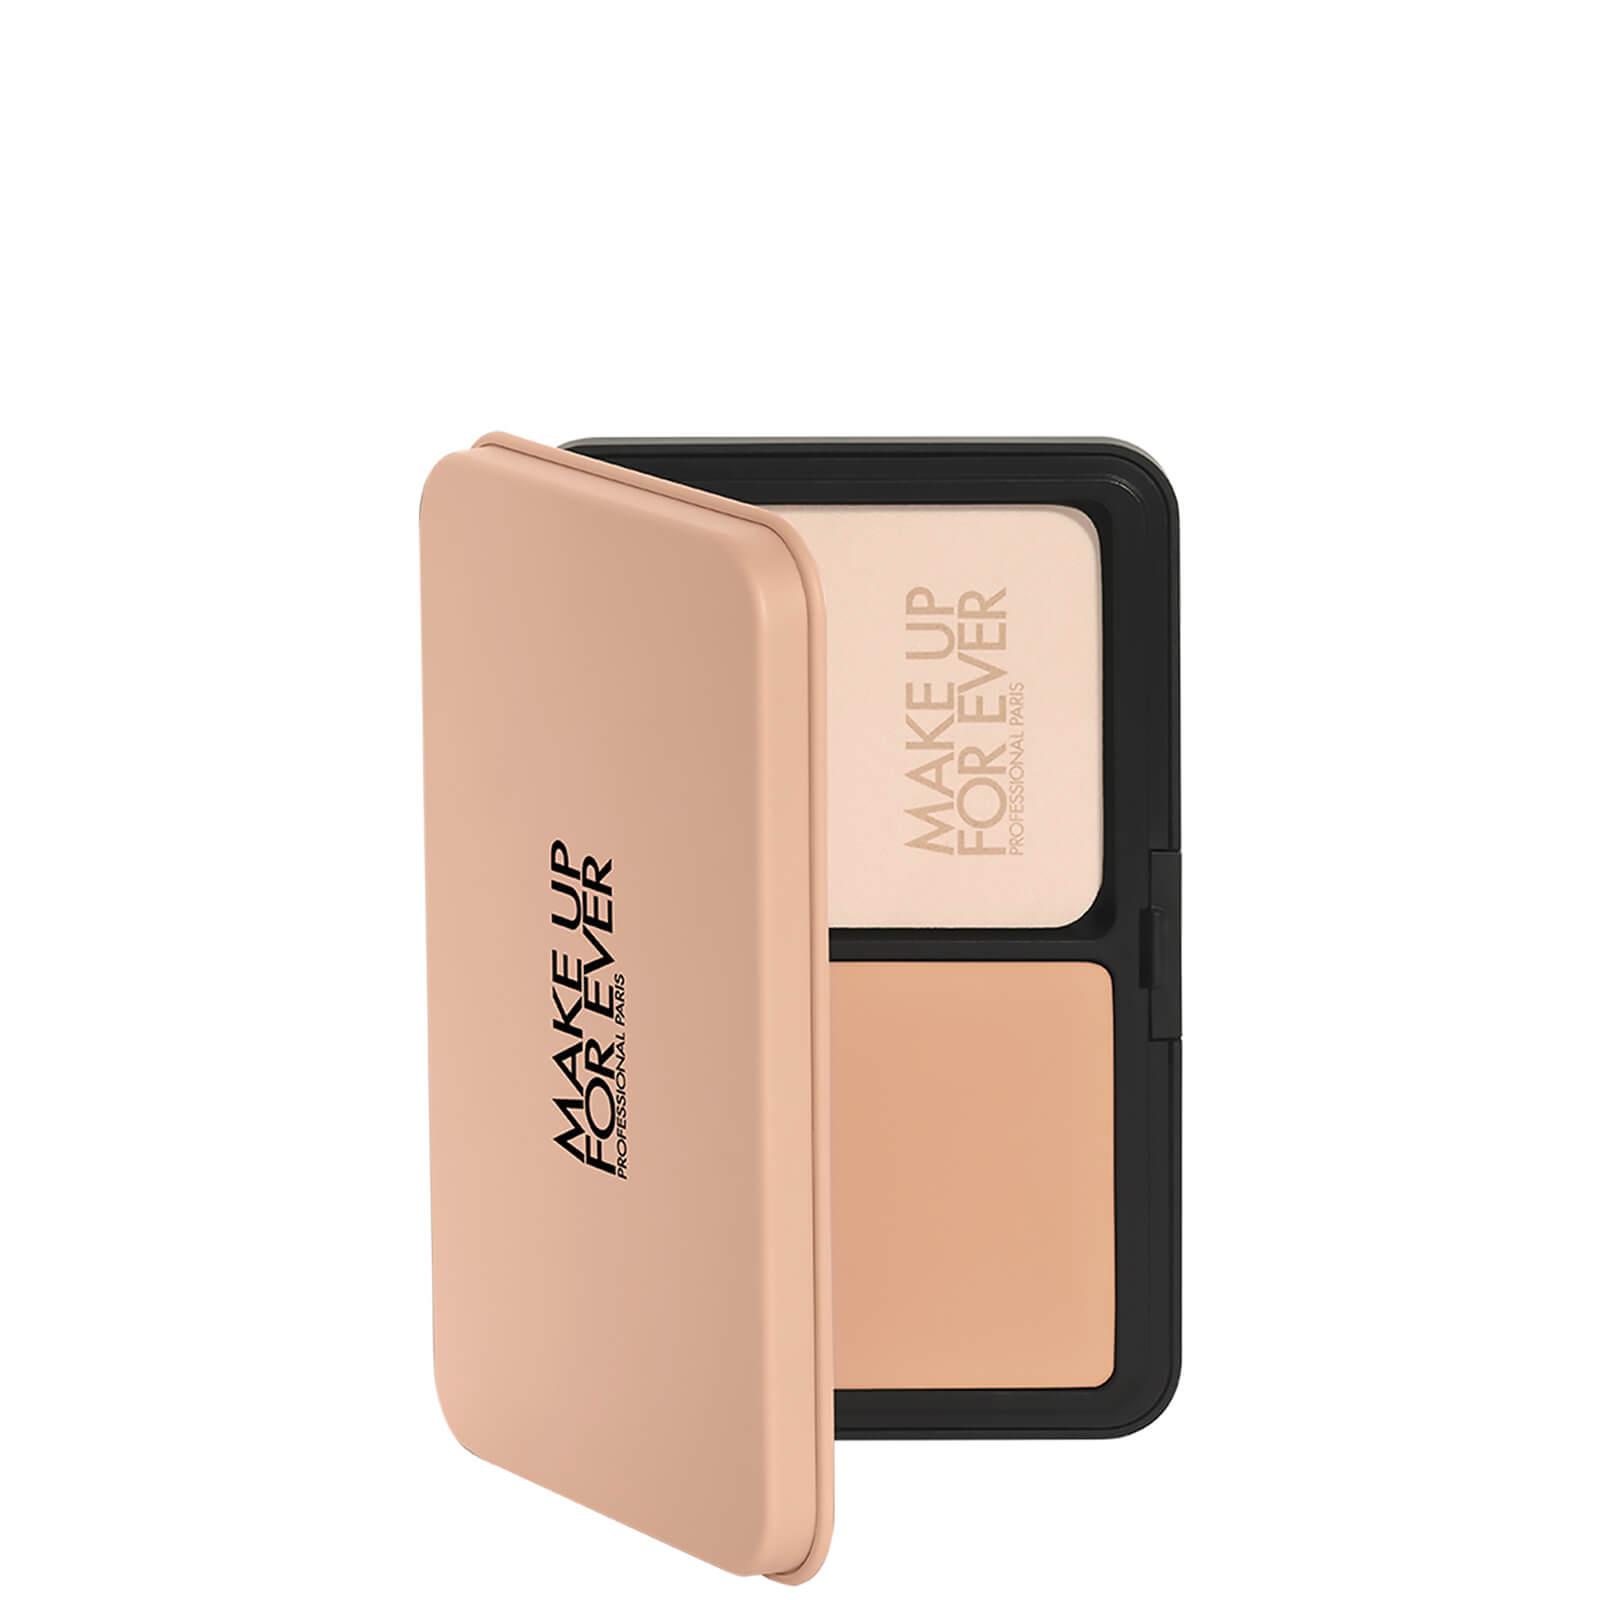 MAKE UP FOR EVER HD SKIN Powder Foundation 11g (Various Shades) - 2Y20